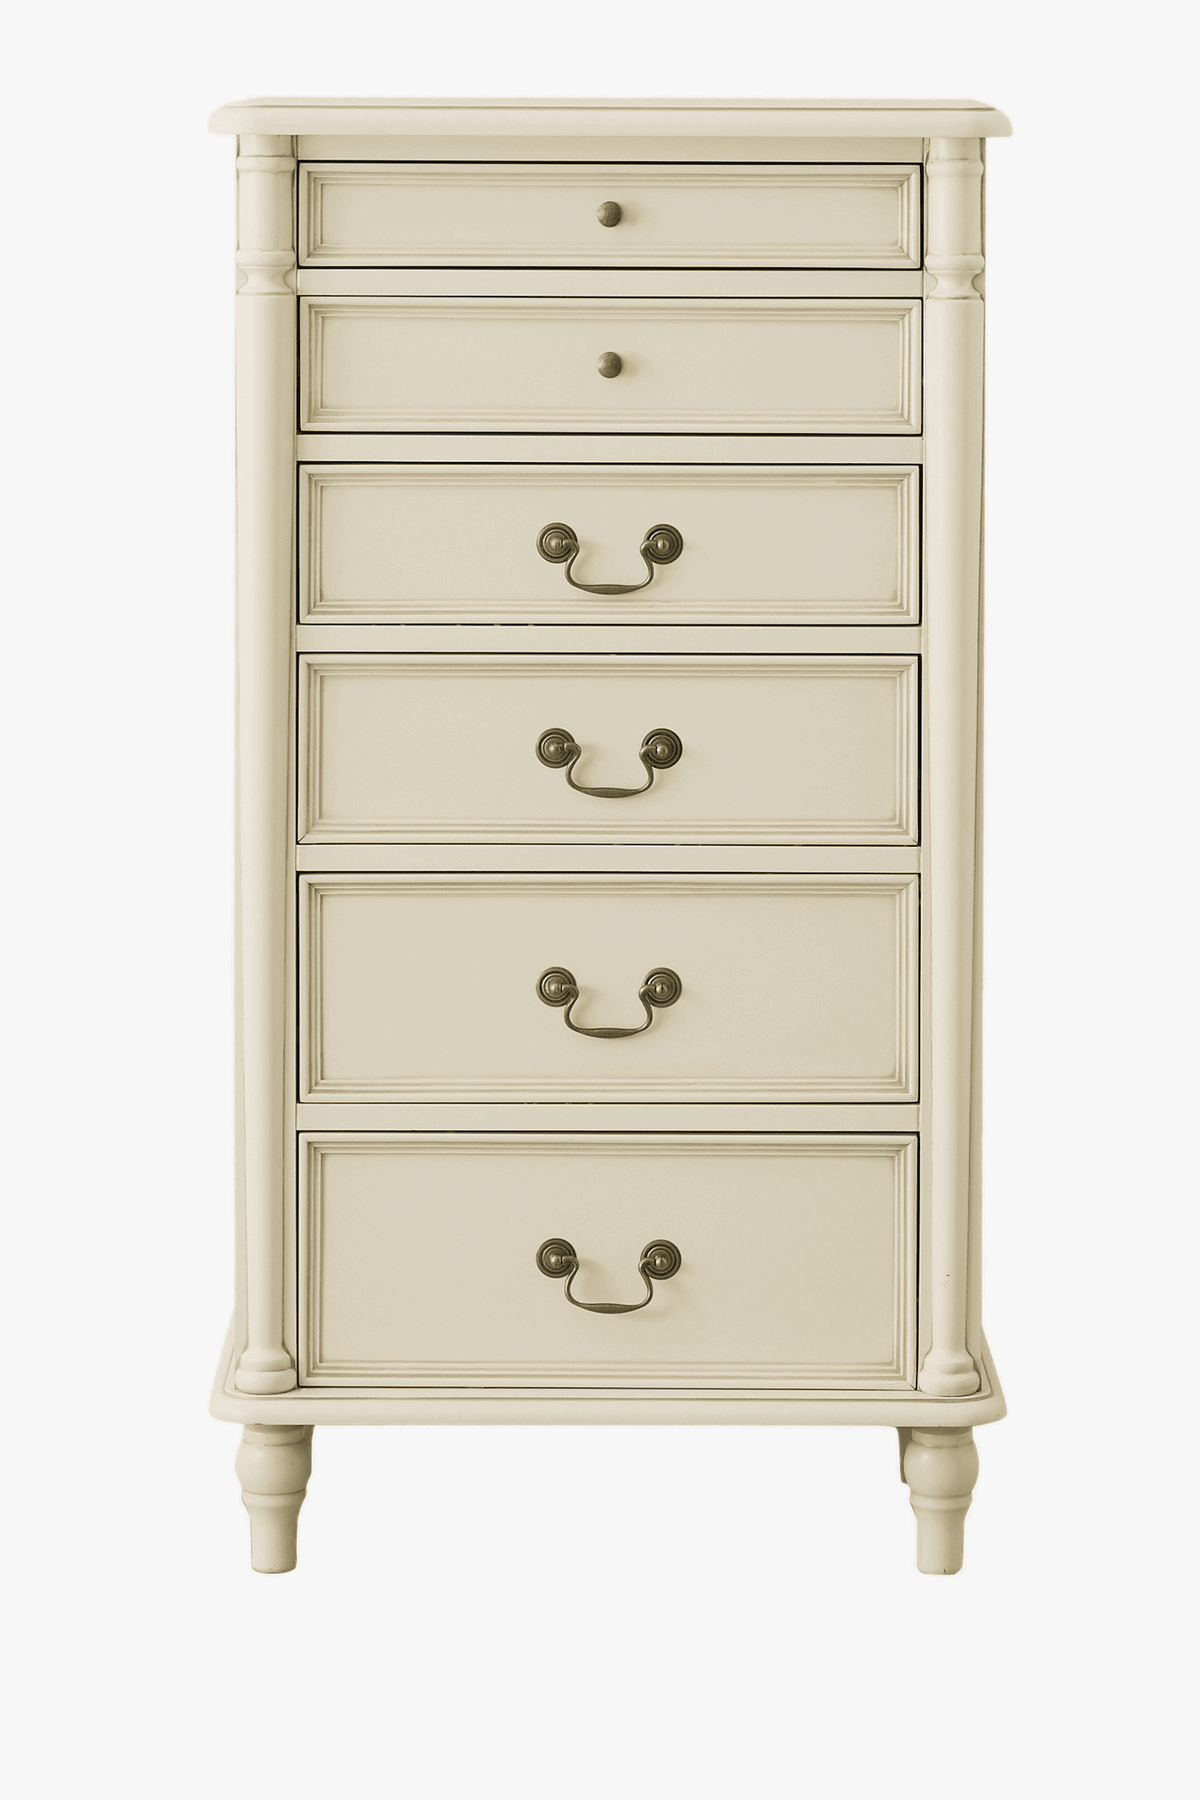 Clifton 6 Drawer Tall Chest